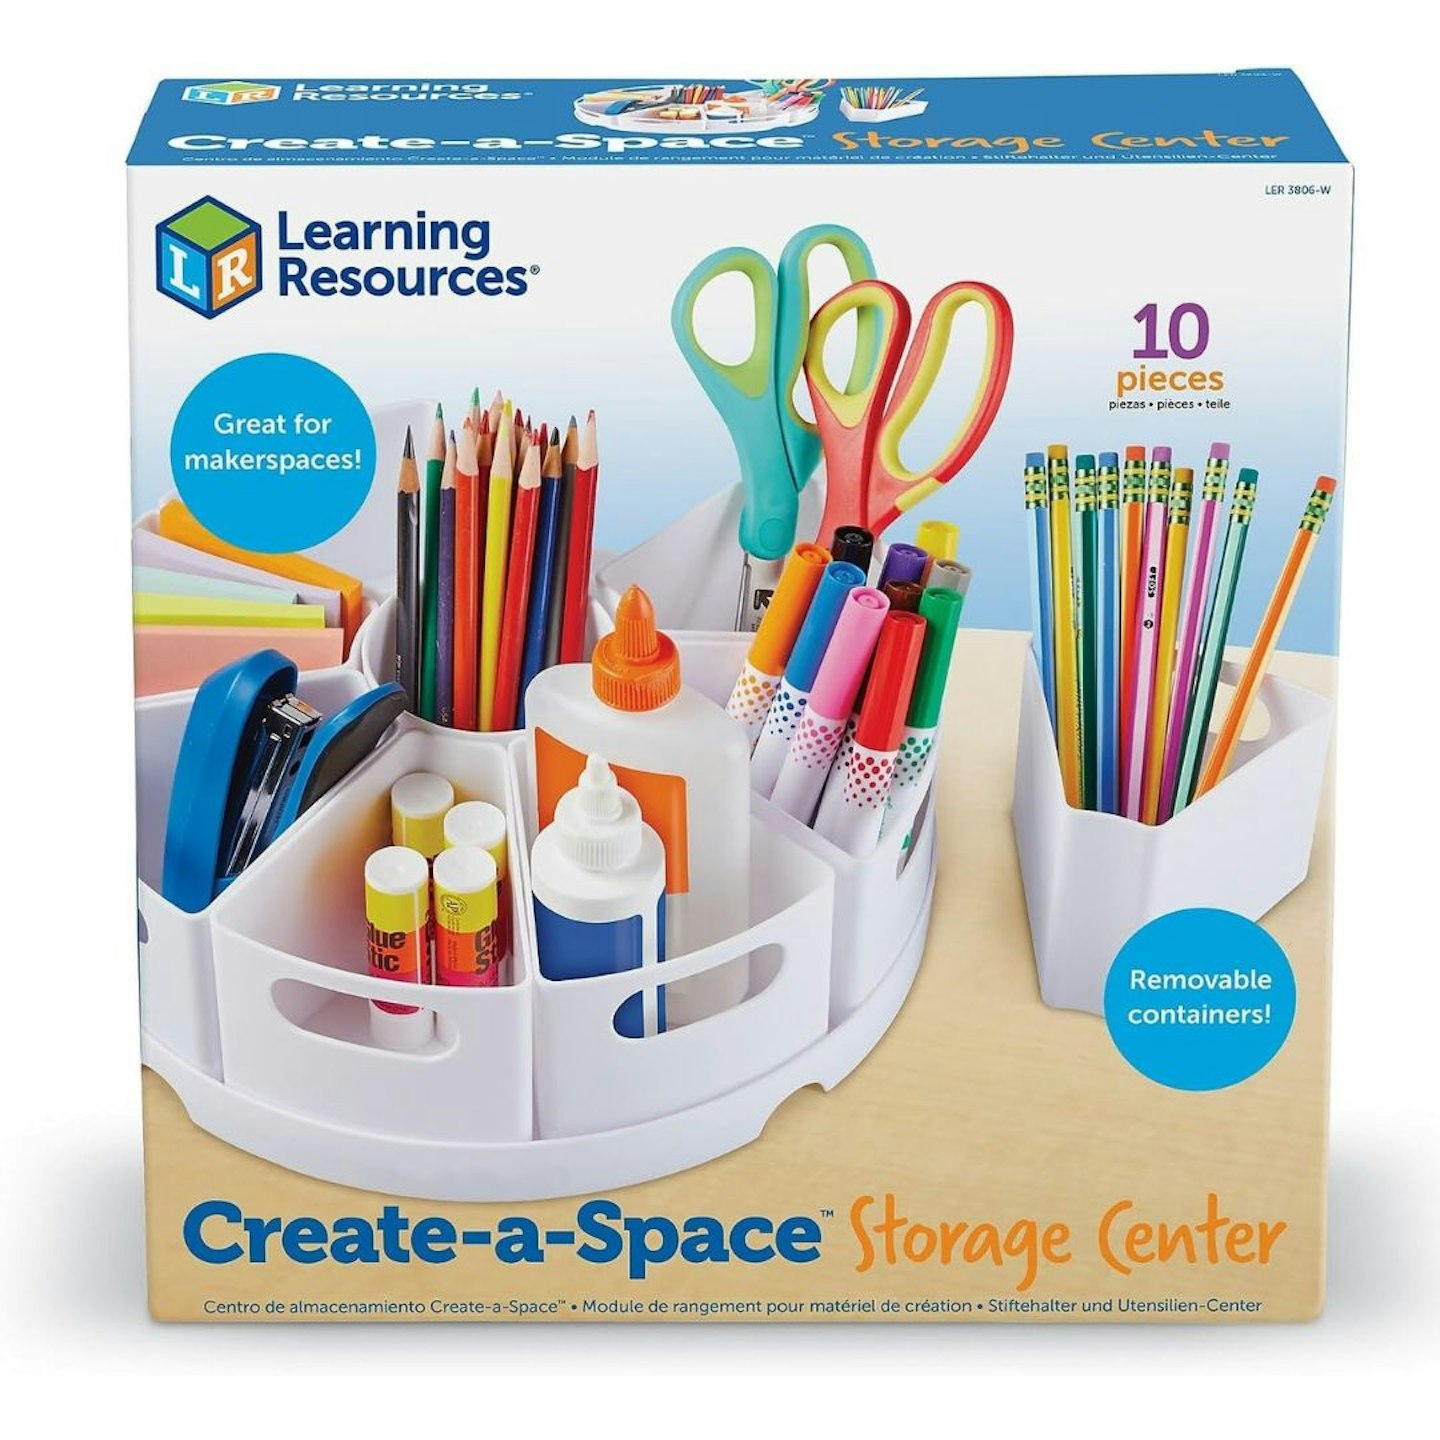 Best Christmas Gifts For Teachers: Learning Resources Create-a-Space Storage Centre 